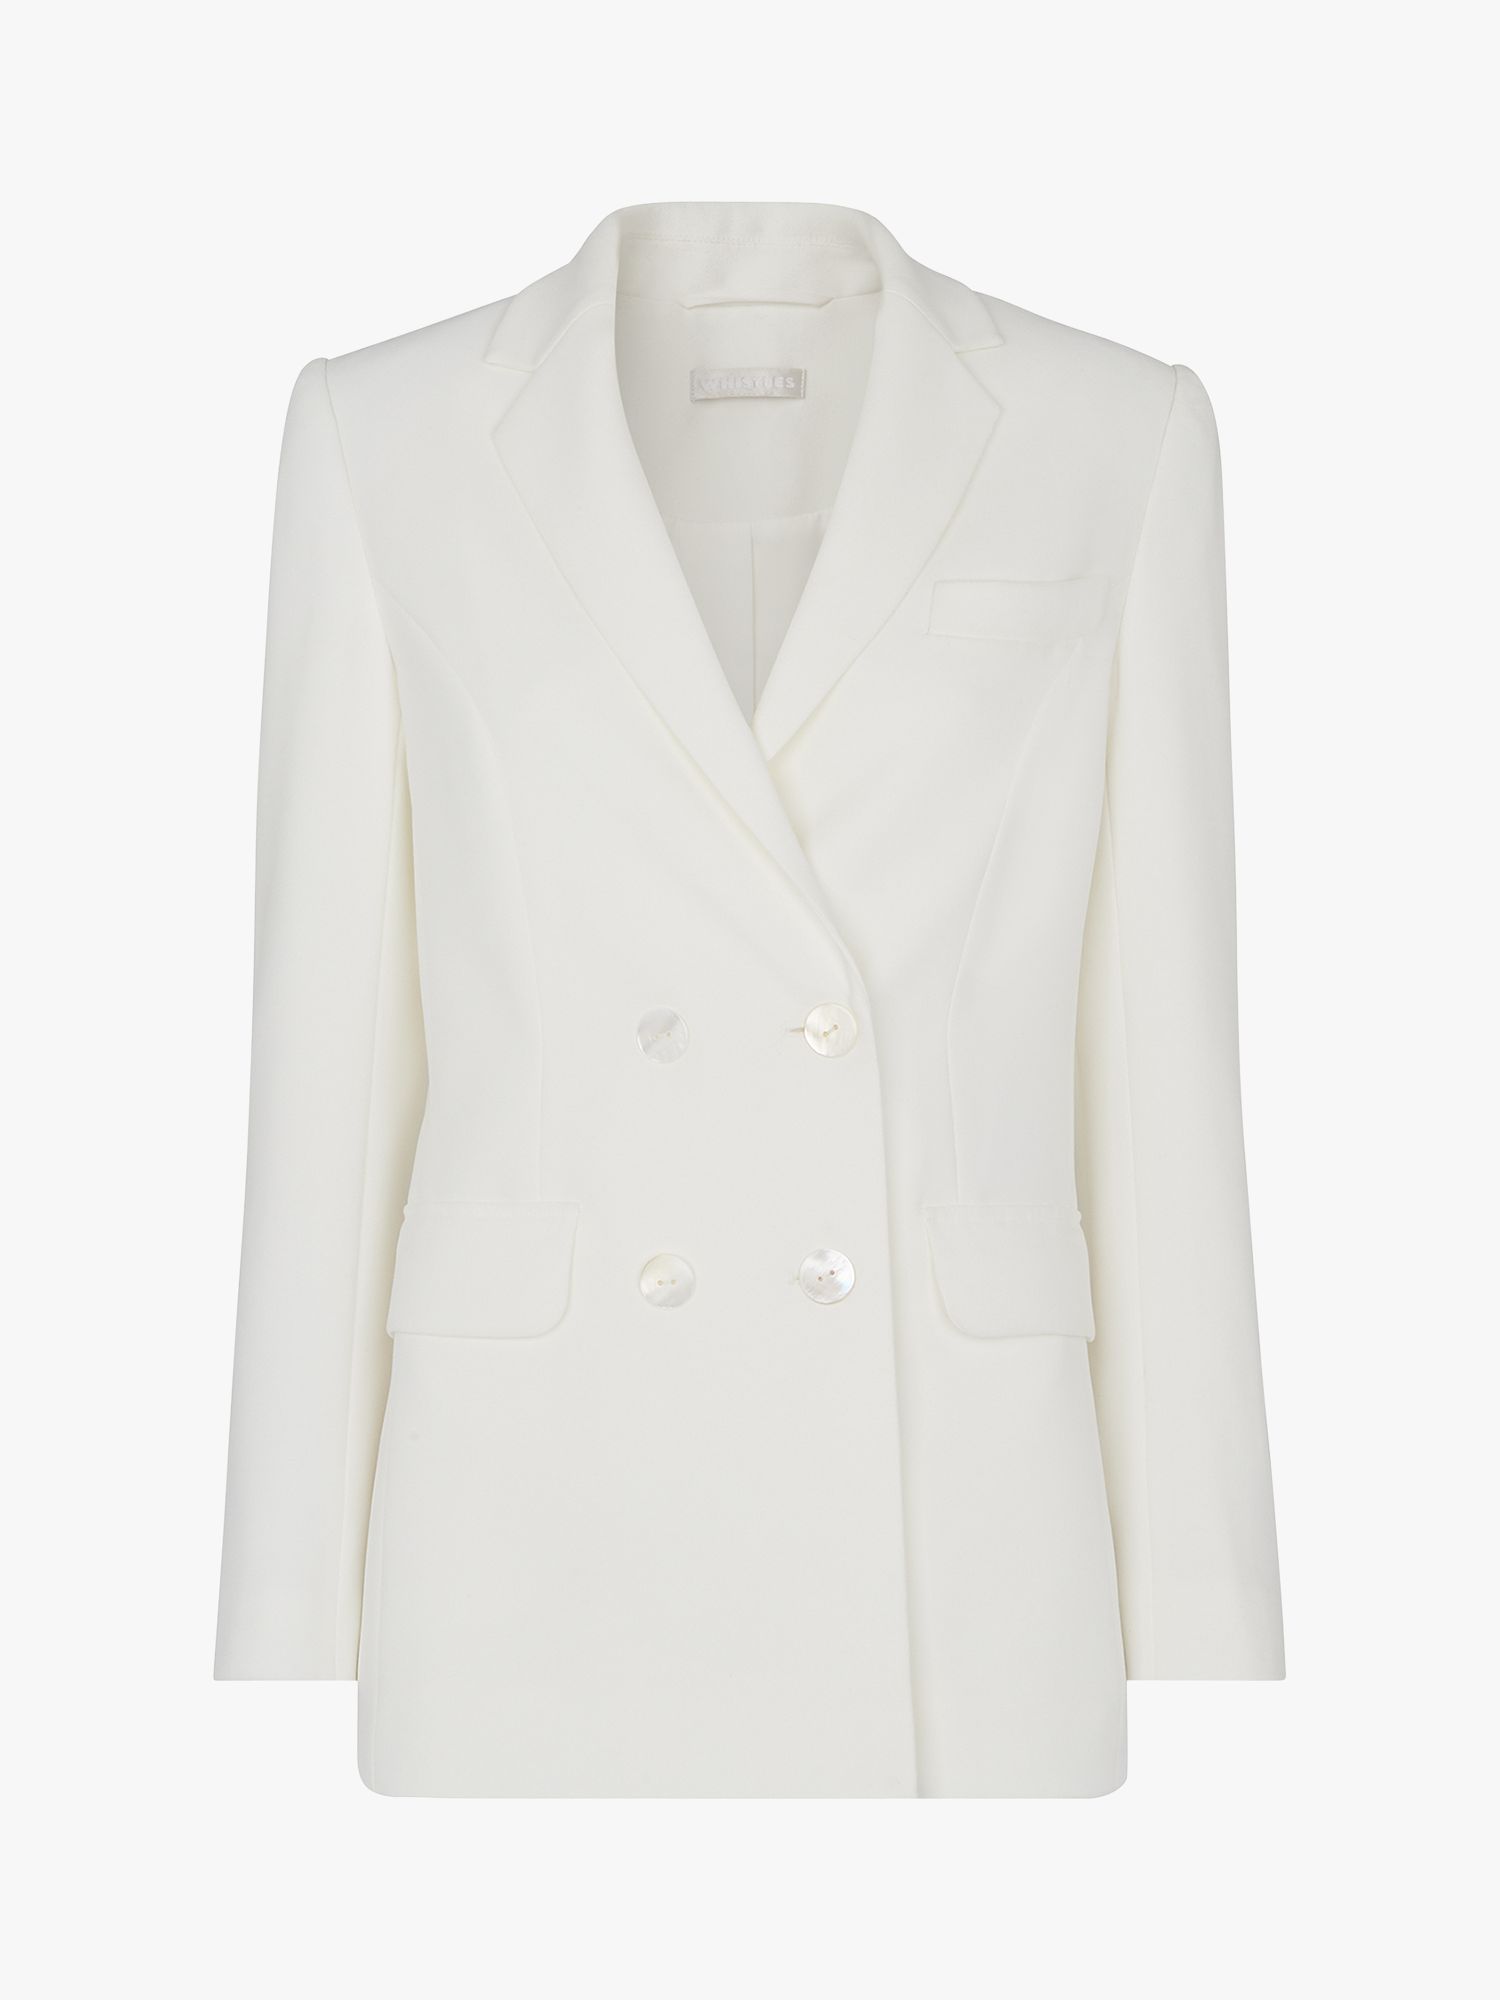 Whistles Annie Double Breasted Wedding Blazer, Ivory, 6